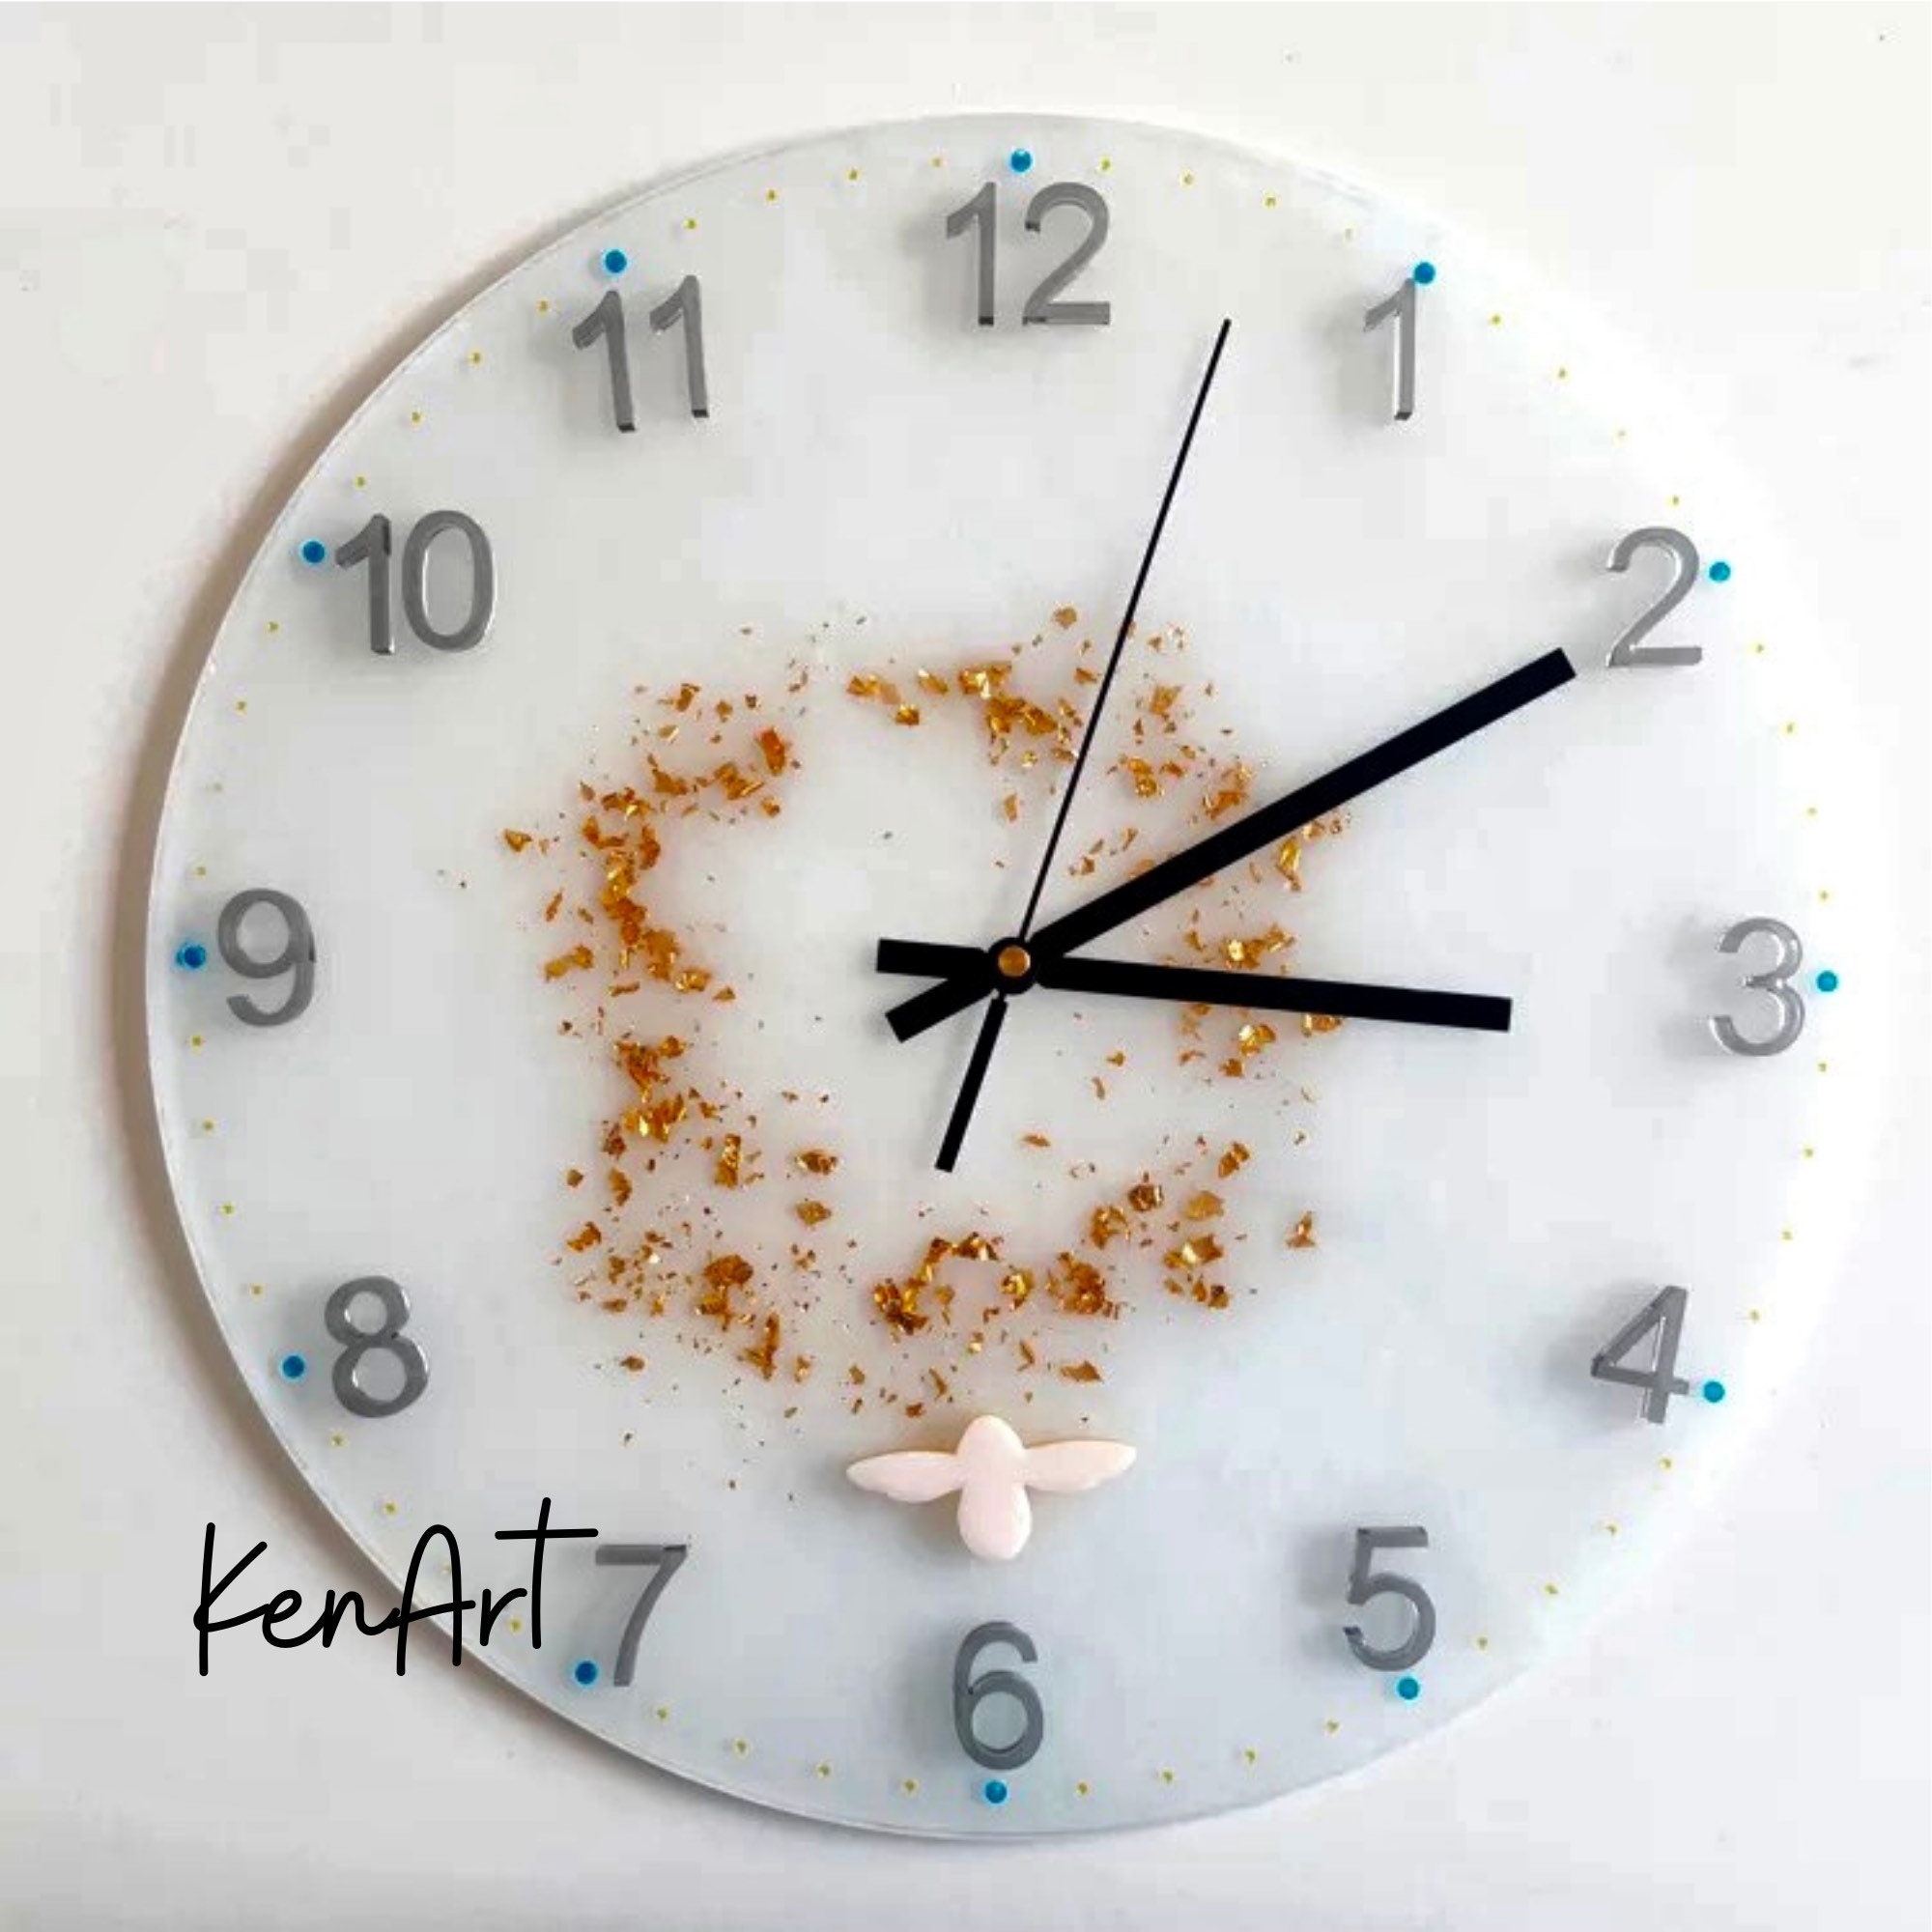 KNAFS Roman Digital Dial Clock Mould Round Resin Casting Silicone Clock Mold  6inch - Roman Digital Dial Clock Mould Round Resin Casting Silicone Clock  Mold 6inch . shop for KNAFS products in